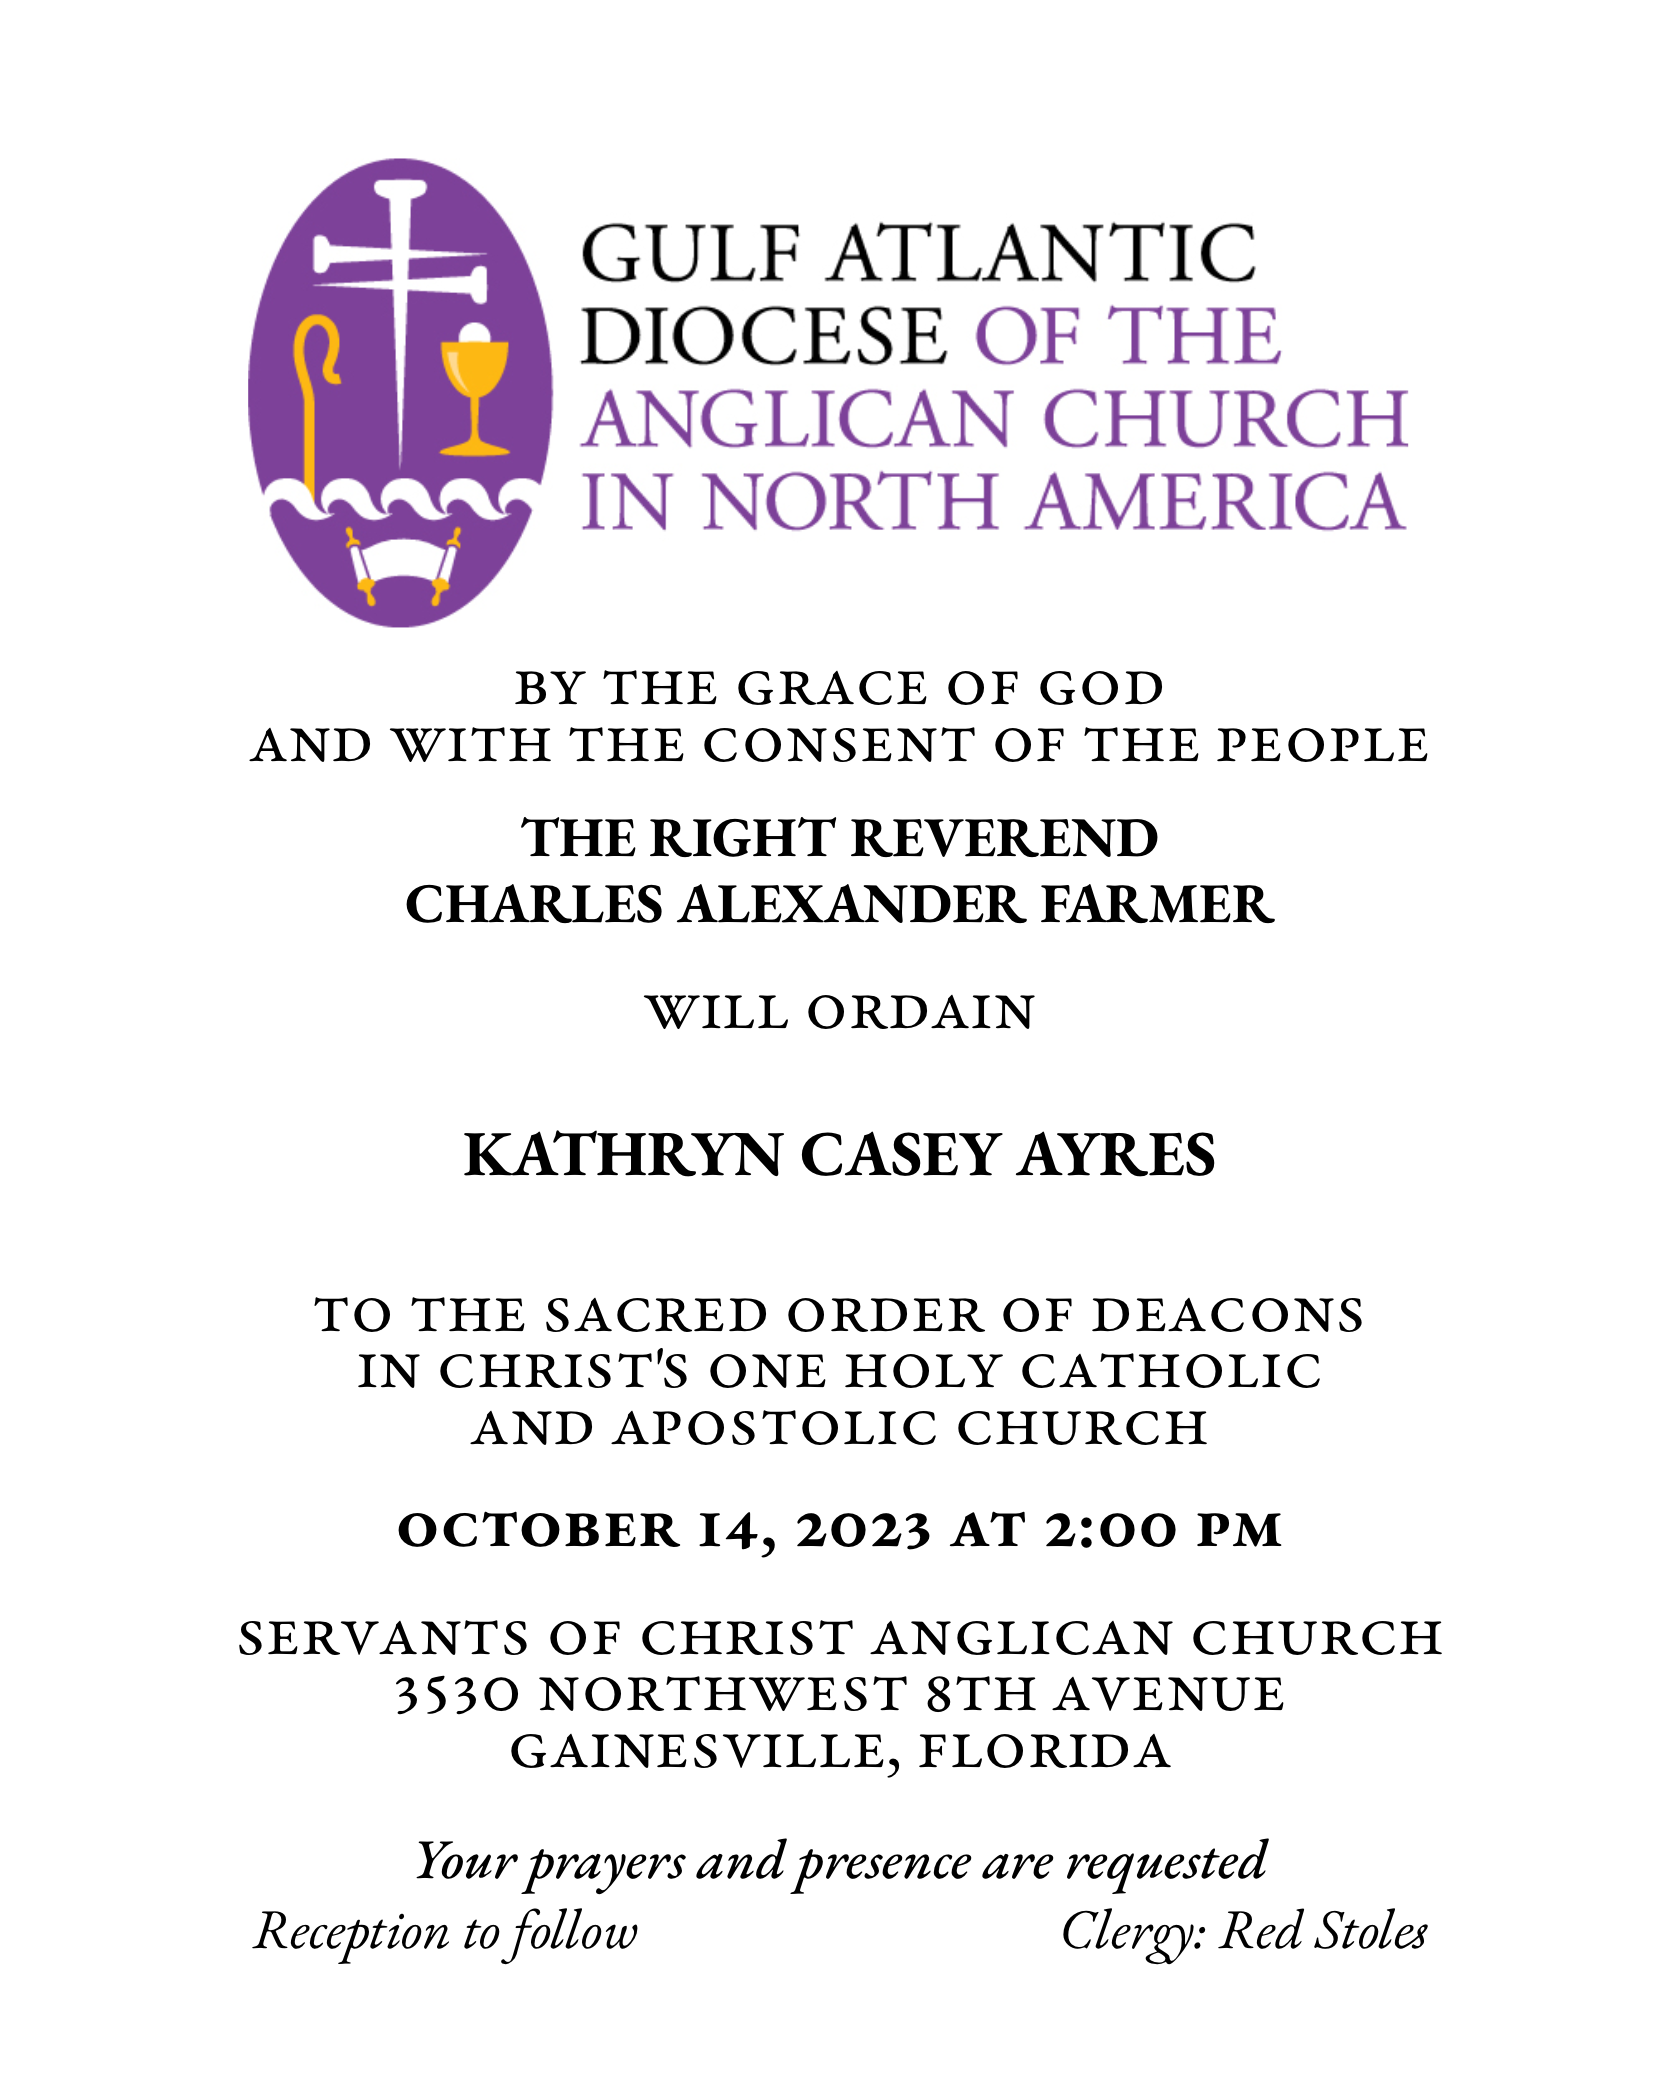 By the Grace of God
and with the consent of the People
THE RIGHT REVEREND
CHARLES ALEXANDER FARMER will ordain
KATHRYN CASEY AYRES
to the Sacred Order of Deacons
in Christ's One Holy Catholic and Apostolic Church
October 14, 2023 at 2:00 p.m.
Servants of Christ Anglican Church
3530 Northwest 8th Avenue
Gainesville, Florida
Your prayers and presence are requested
Reception to follow
Clergy: Red Stoles